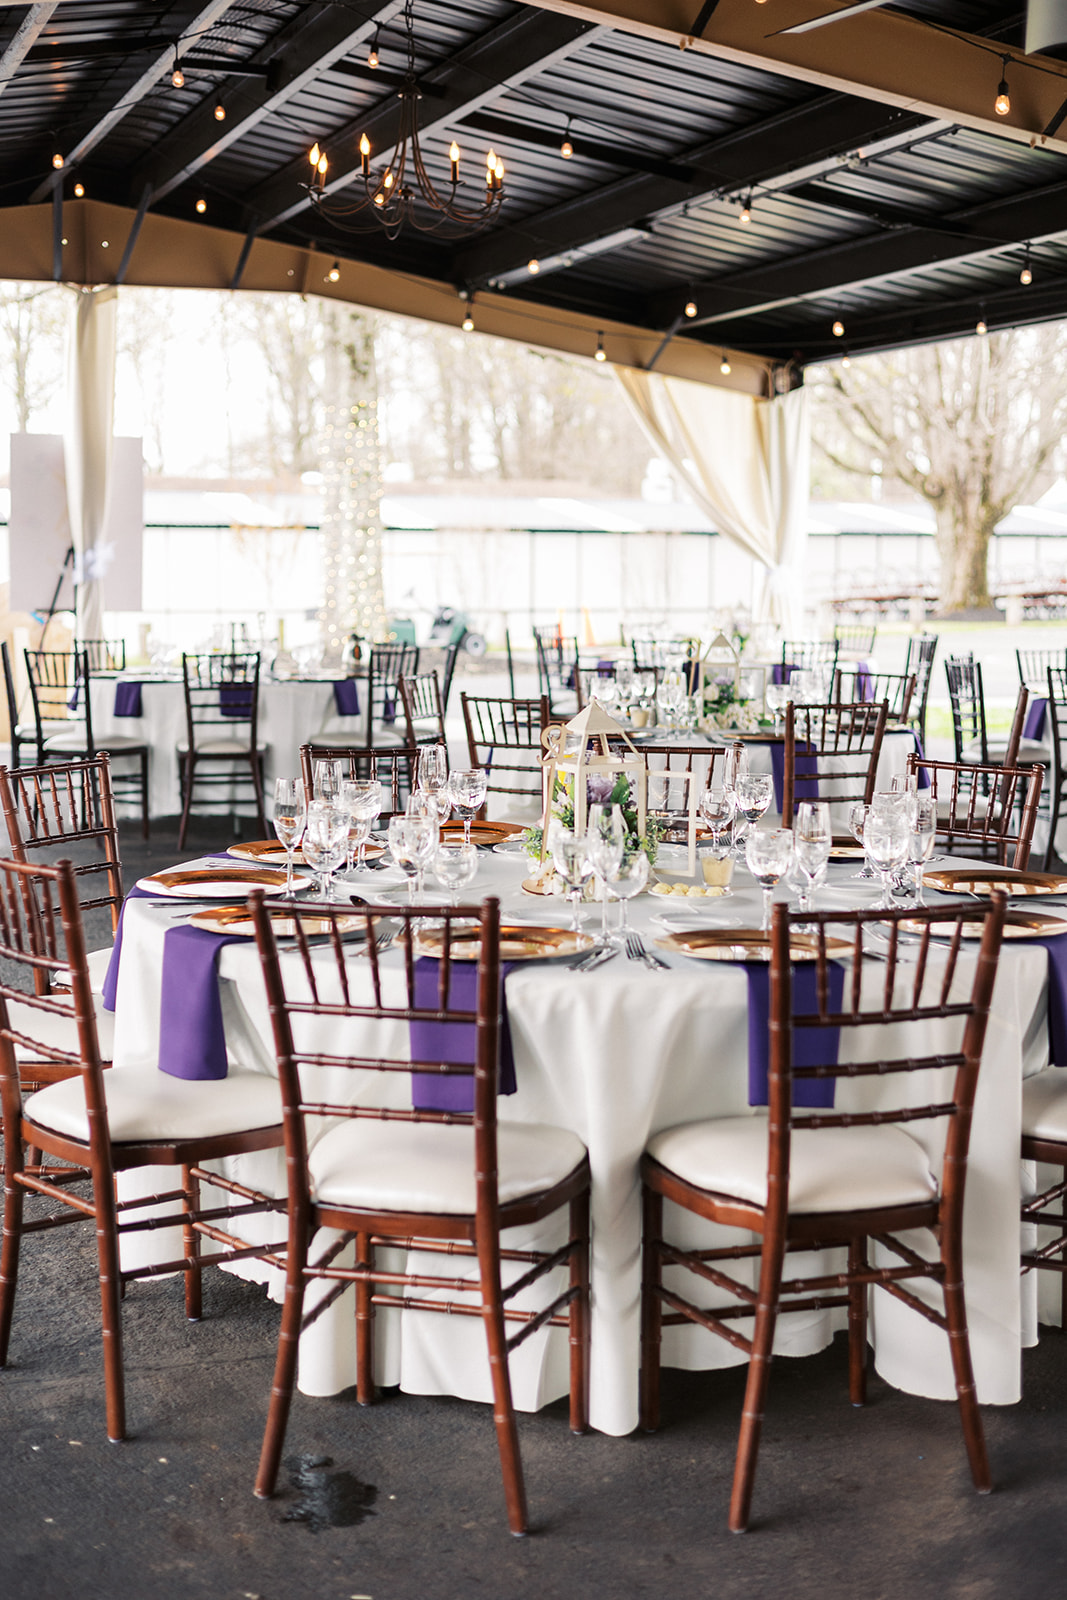 Details of a Forest Lodge Wedding reception set wit white linen and purple napkins